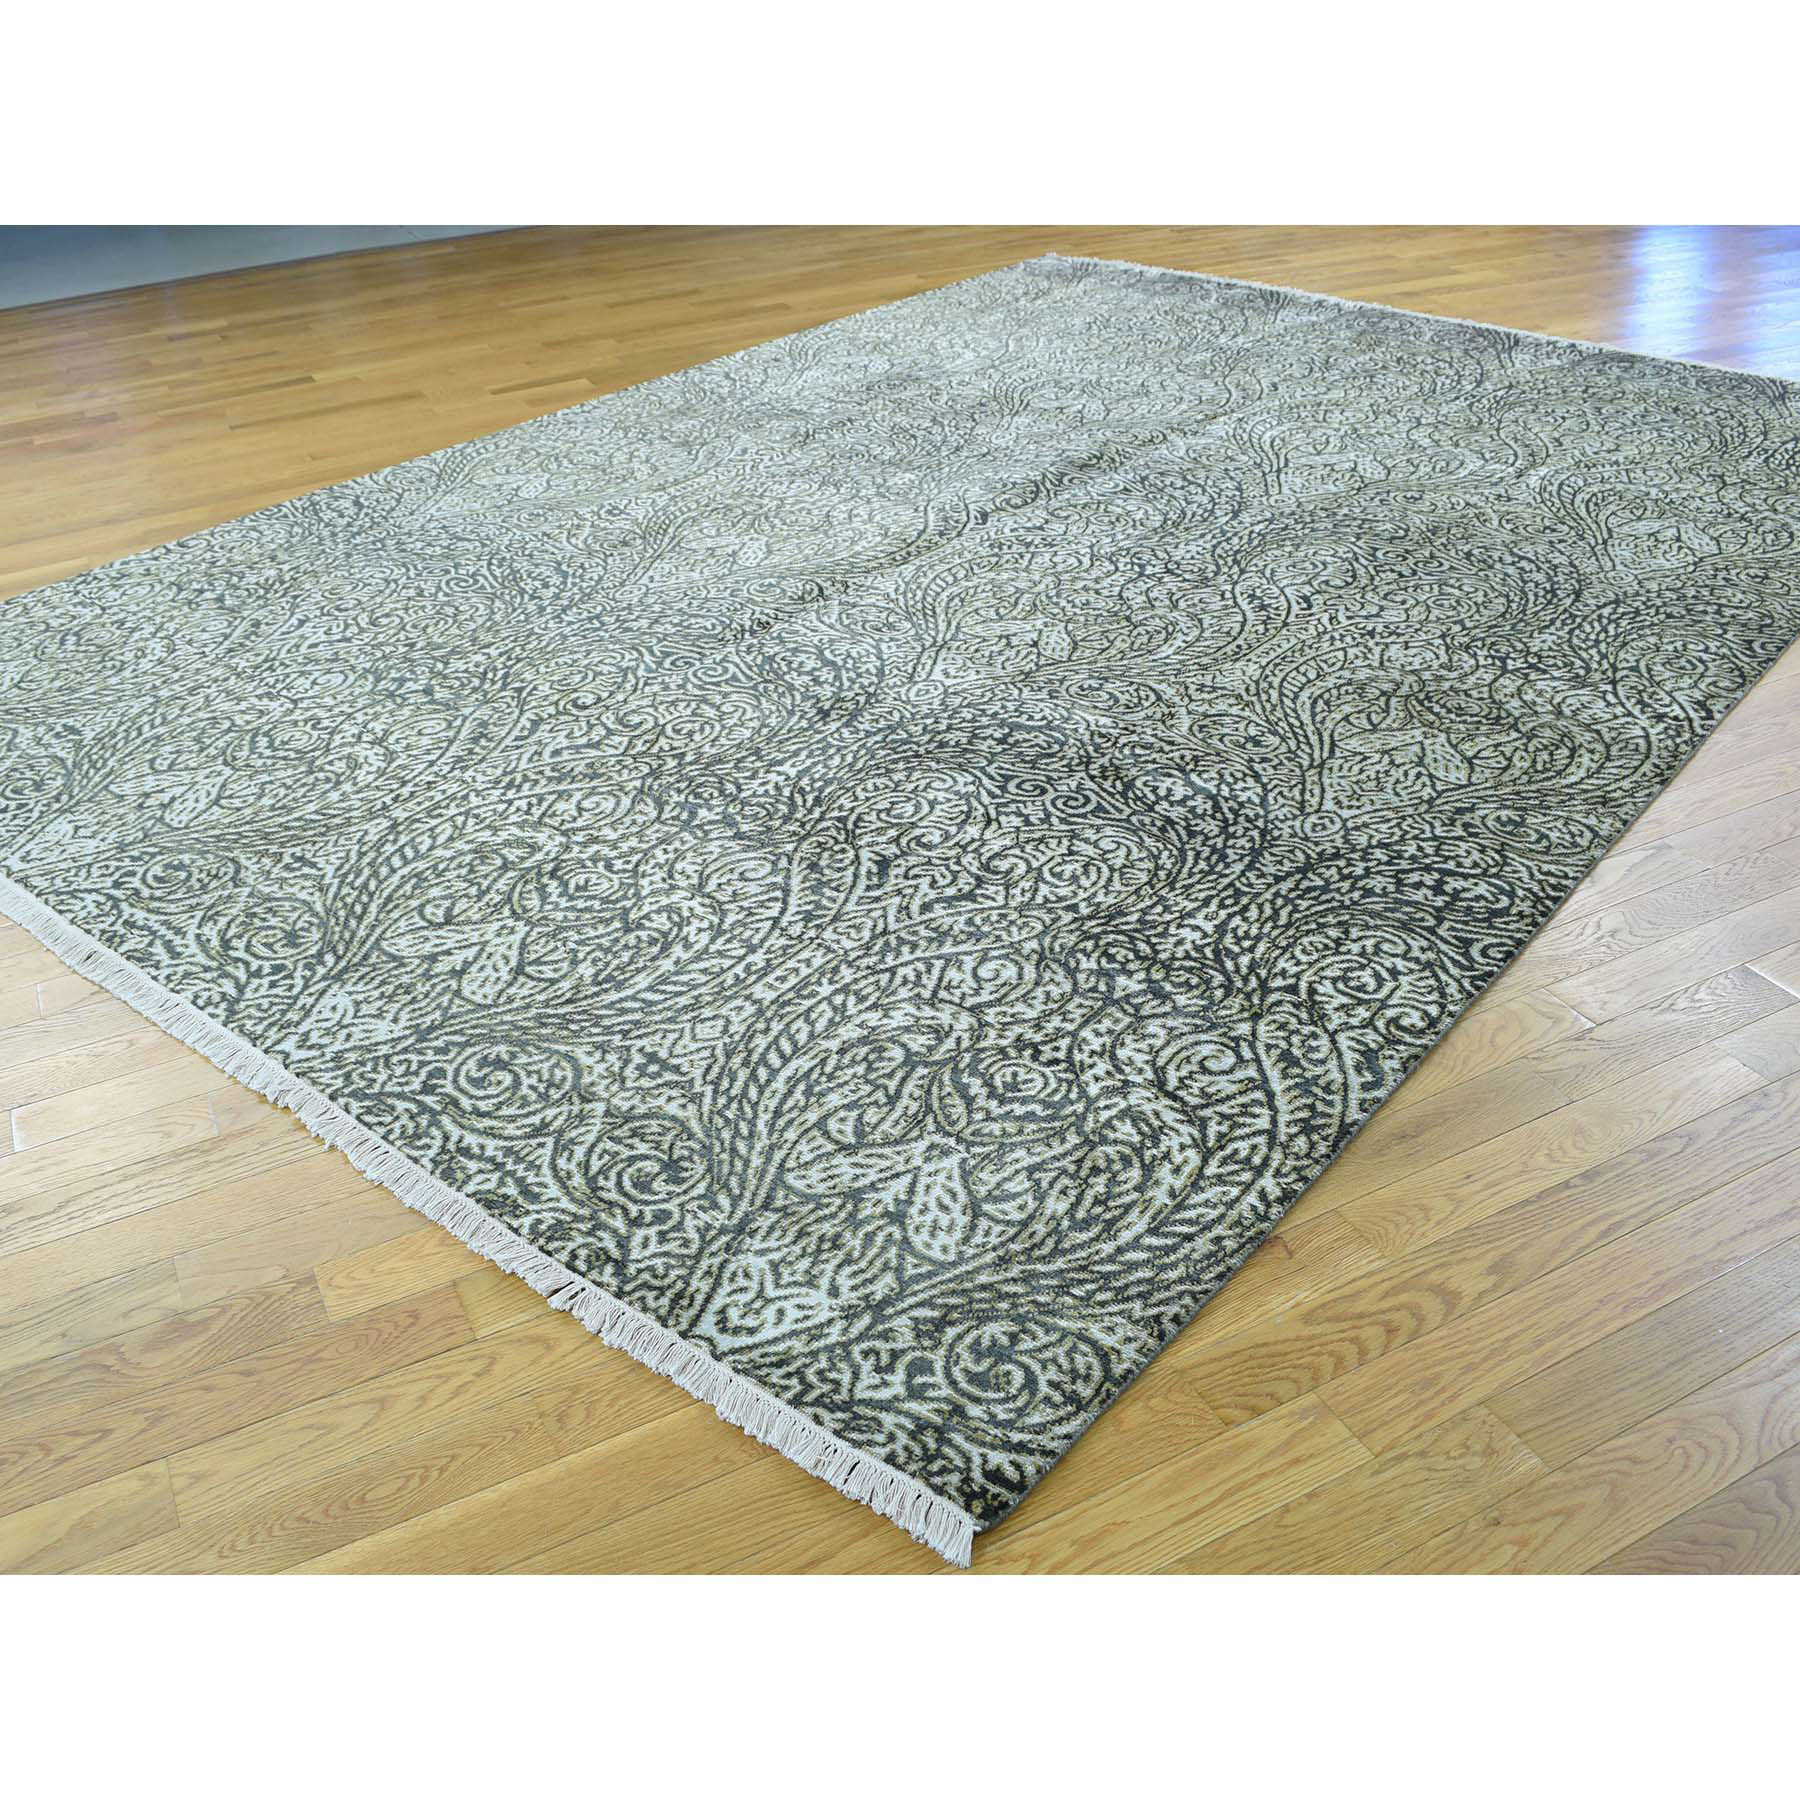 8-8 x12-3  Hand-Knotted Wool and Silk Tone on Tone Damask Design Rug 